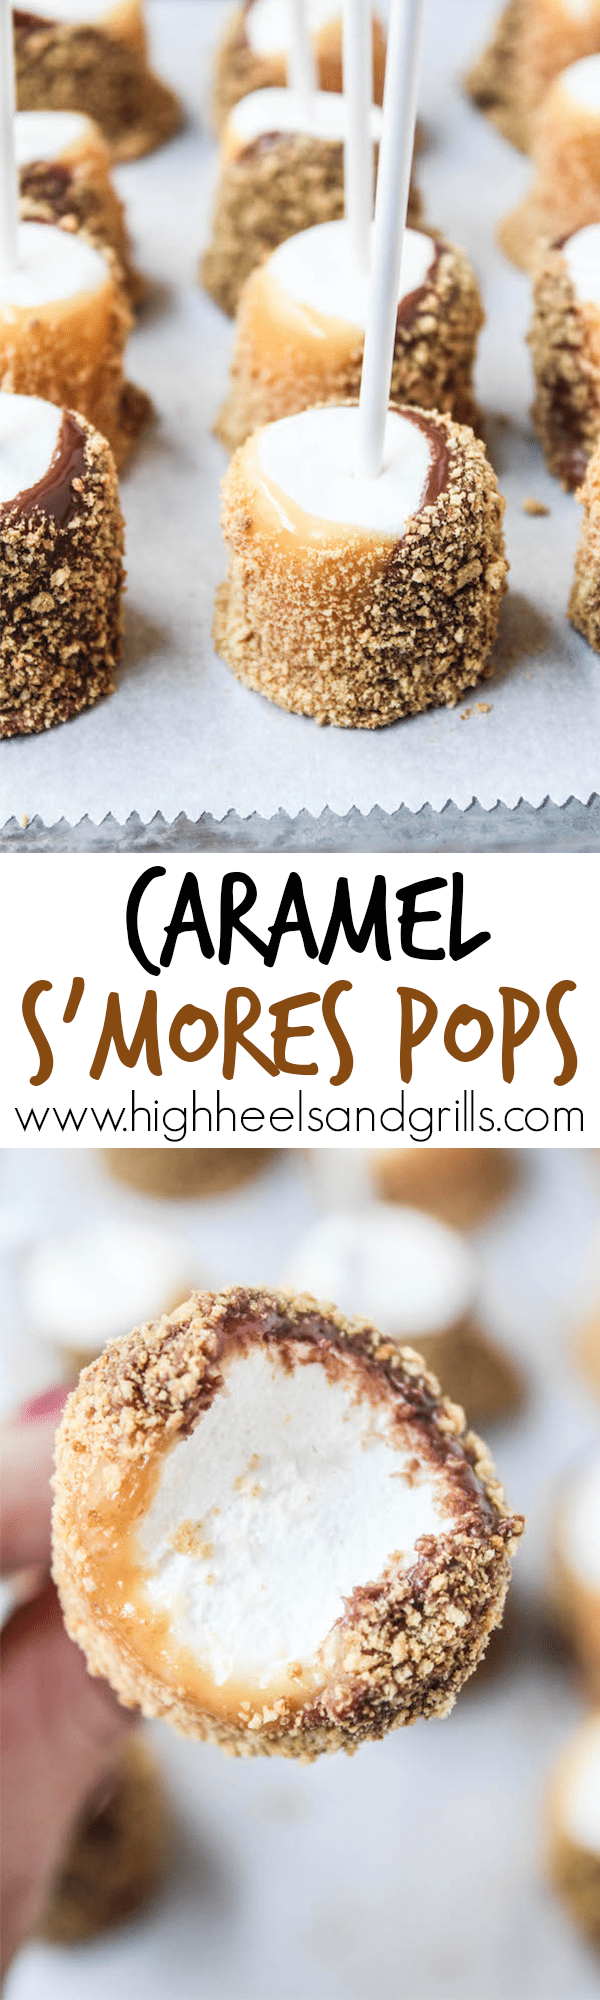 Caramel S'mores Pops - These are so easy to throw together and taste incredible! #LetsMakeSmores #ad